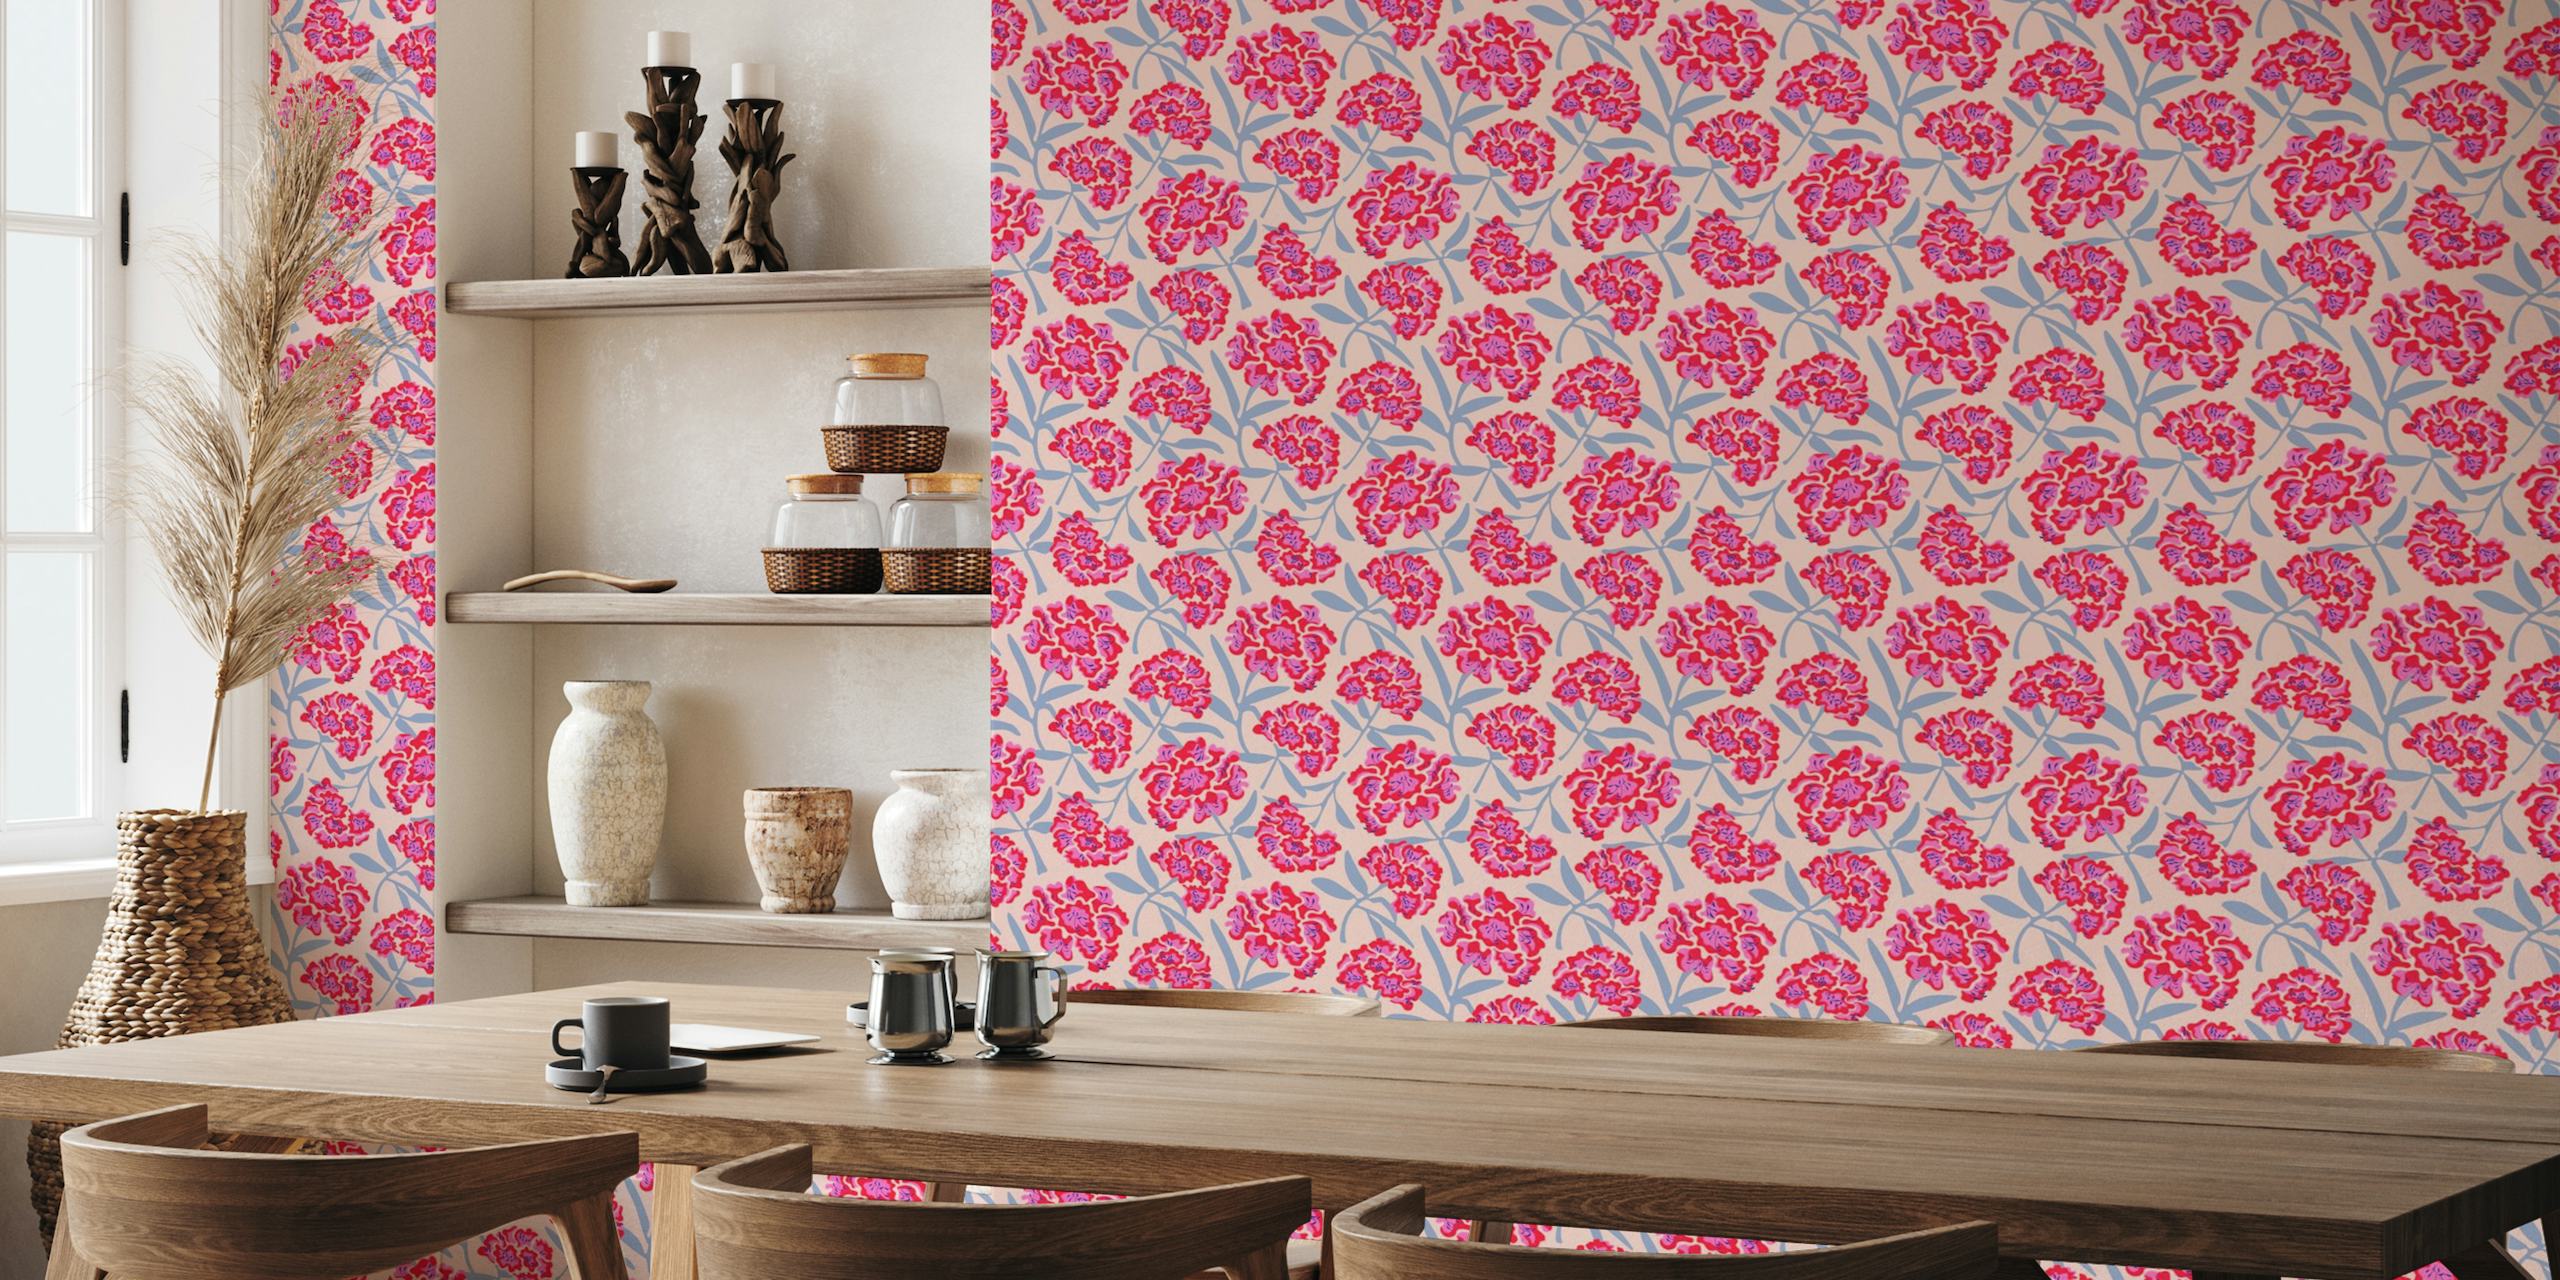 RHODODENDRONS Floral - Fuchsia Pink - Small wallpaper